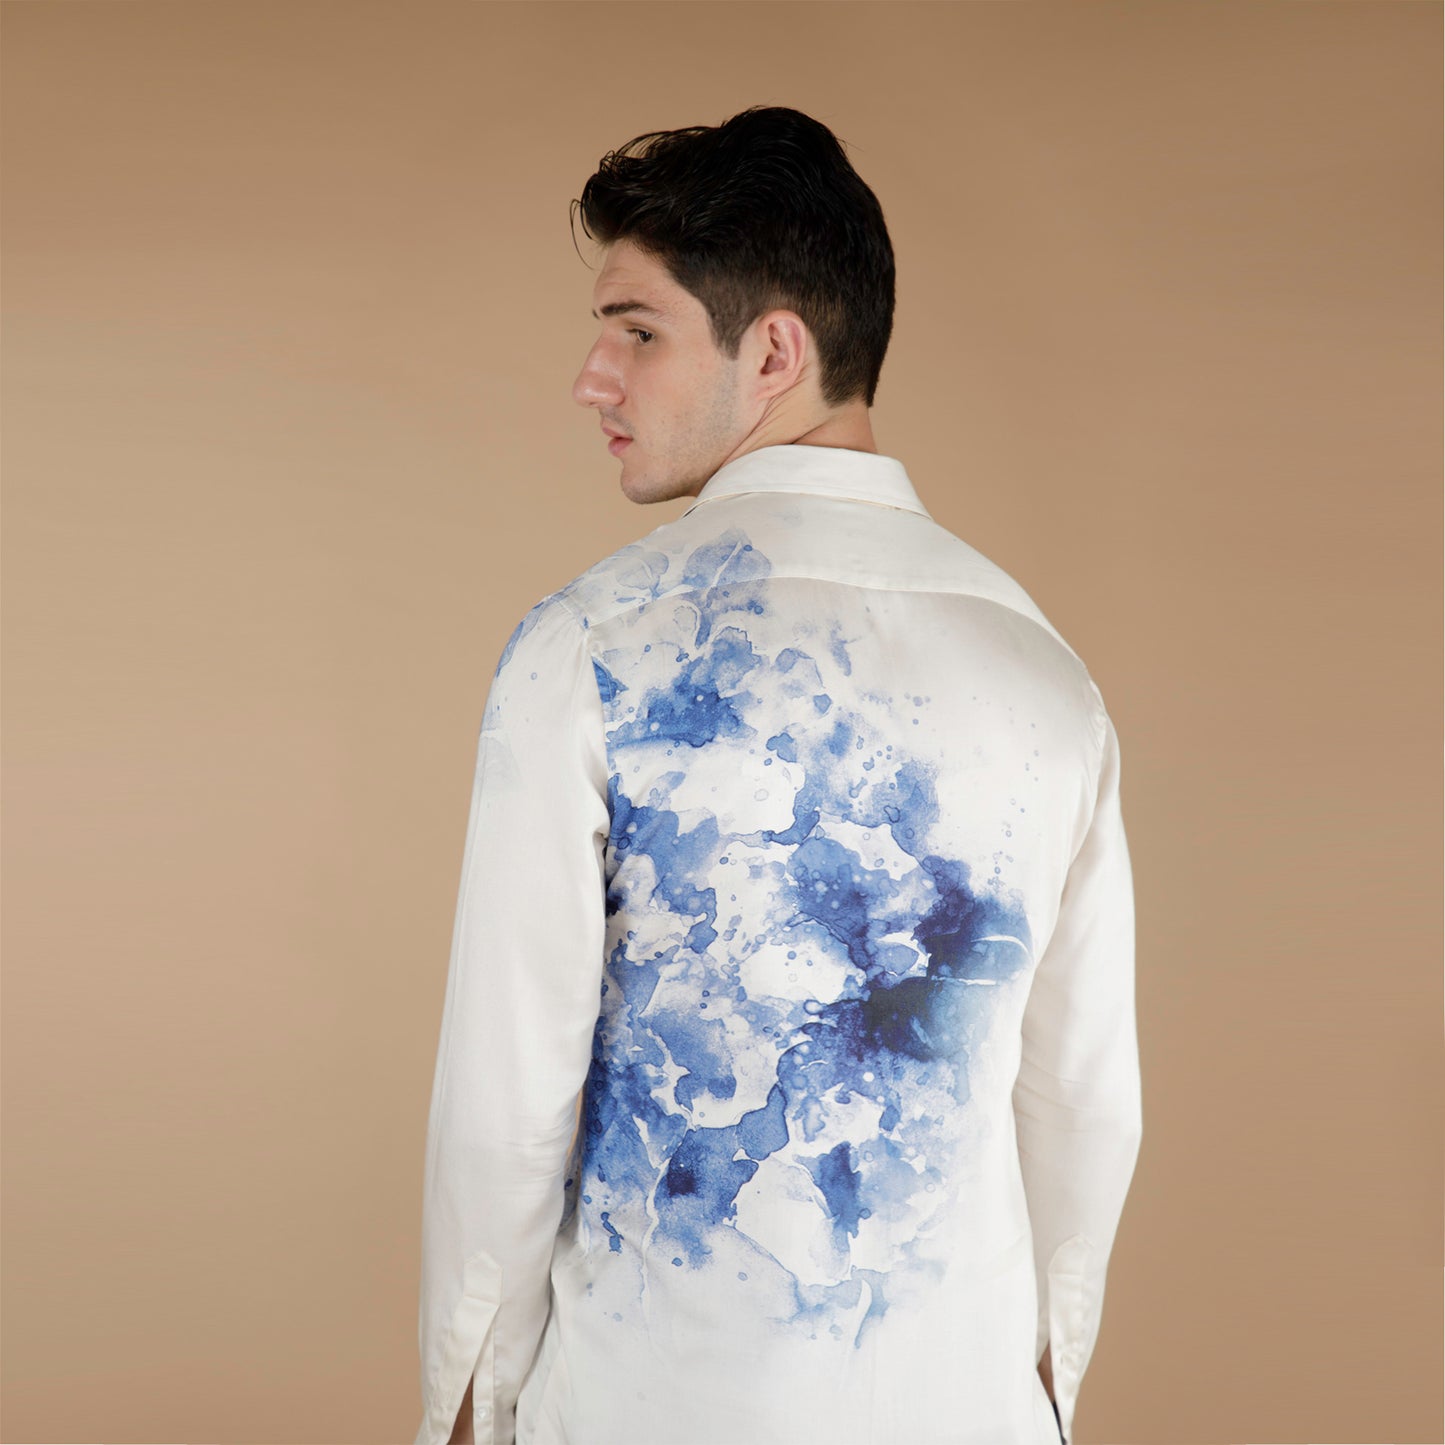 Global medium size model wearing an exquisite Cream and Blue printed organic lotus fabric shirt, meticulously crafted from luxurious Lotus stem silk fabric. Adorned with a striking blue floral in front and back with a placement print cascading from the left side to the right, against a pristine cream base